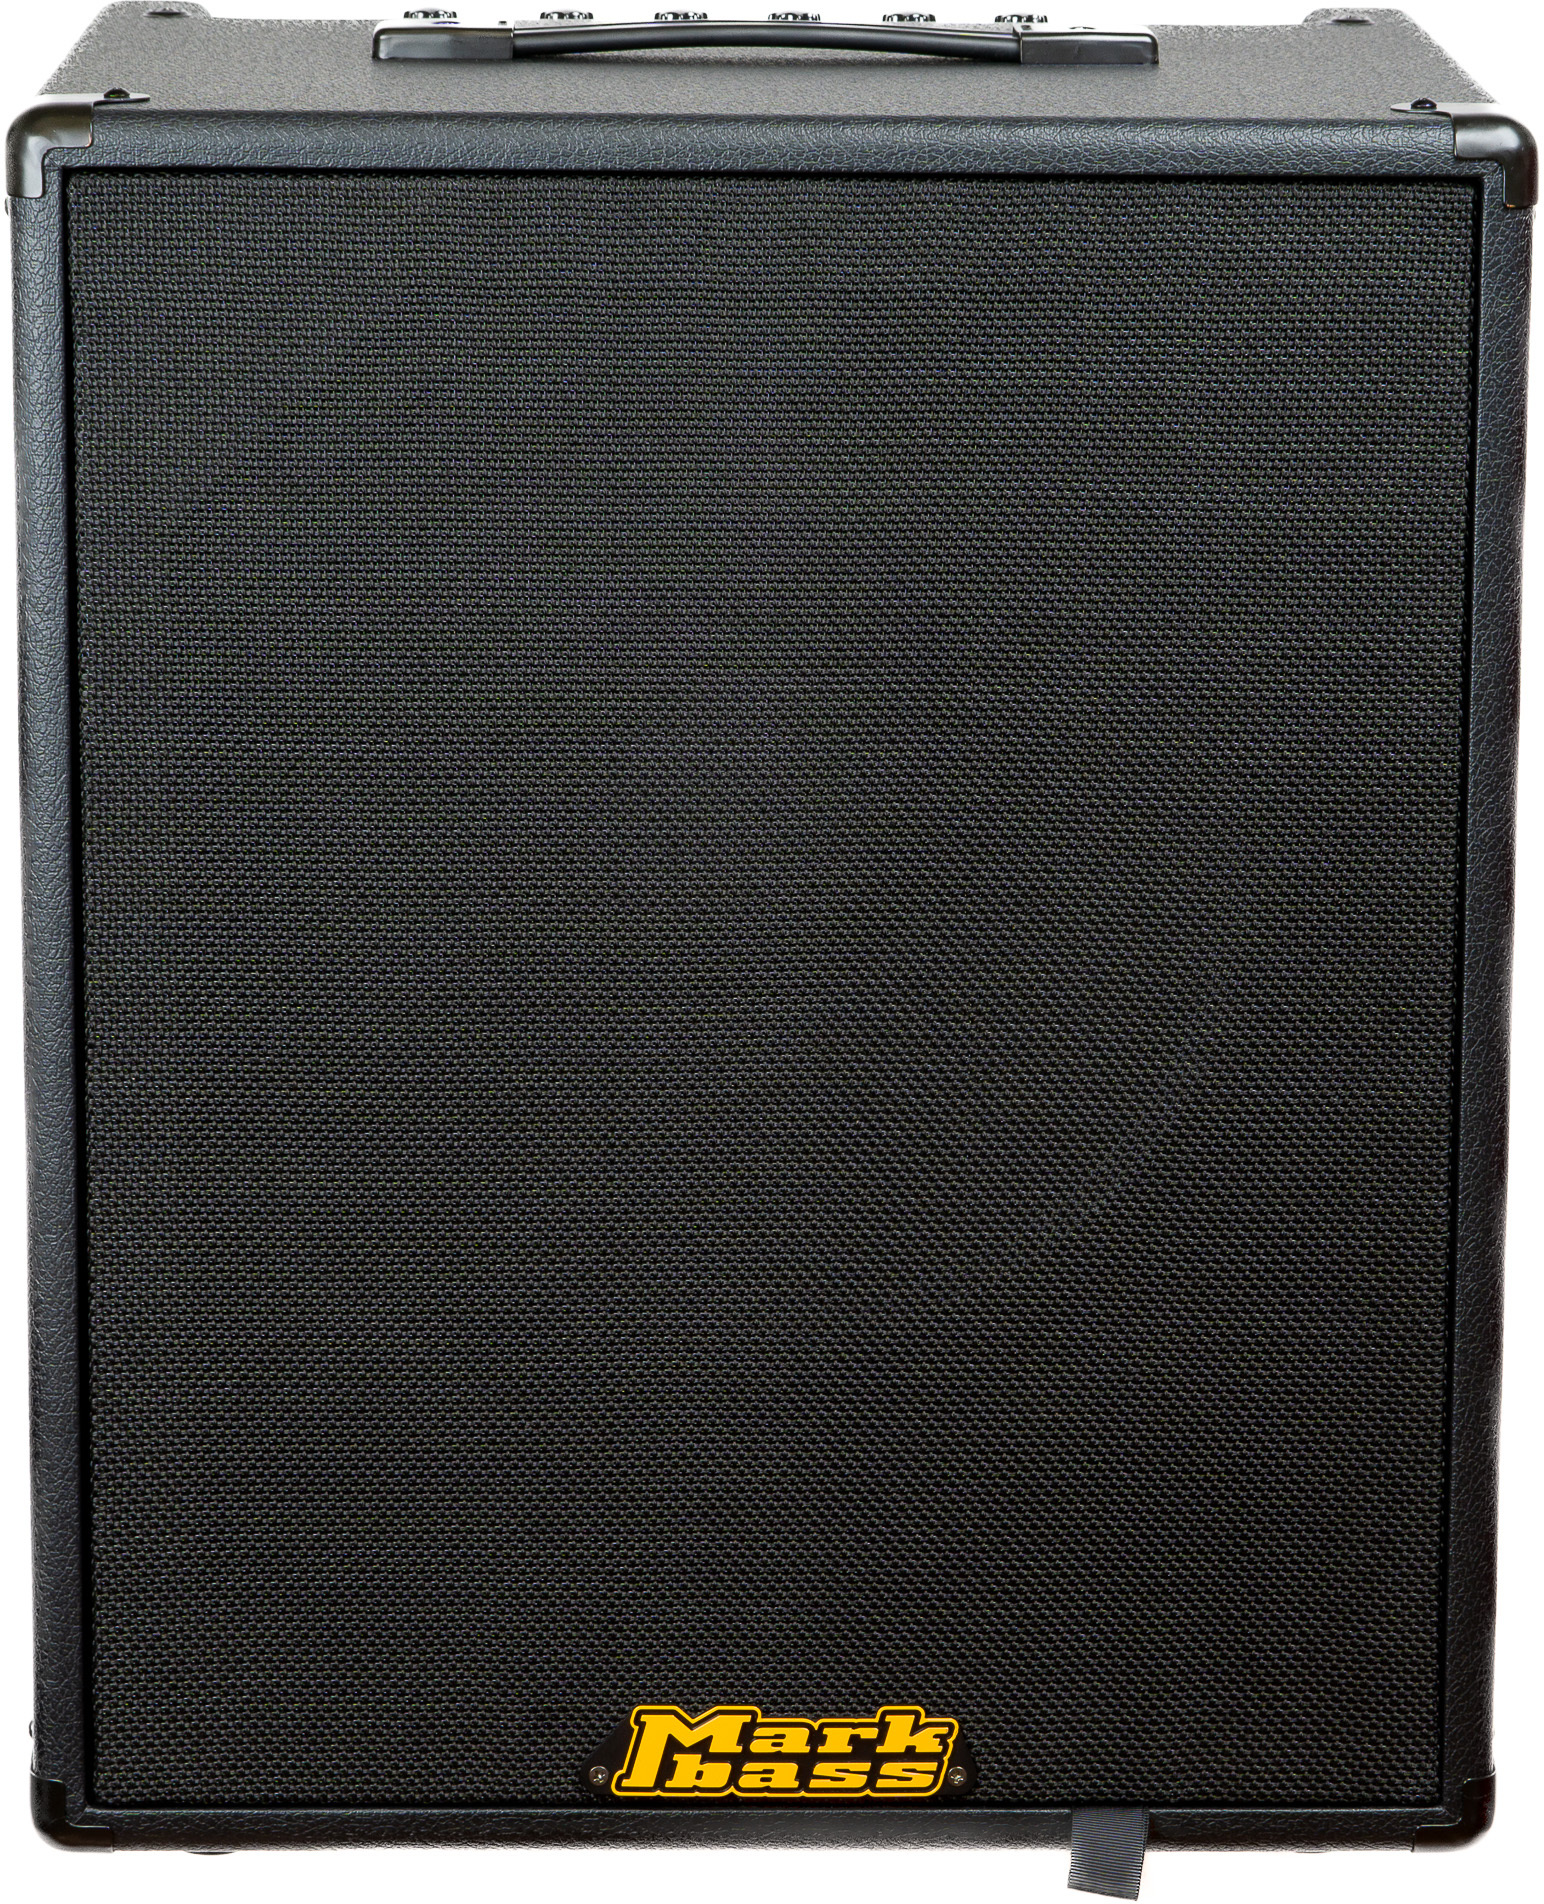 Markbass Cmb 151 Black Line 150w 1x15 - Combo voor basses - Main picture